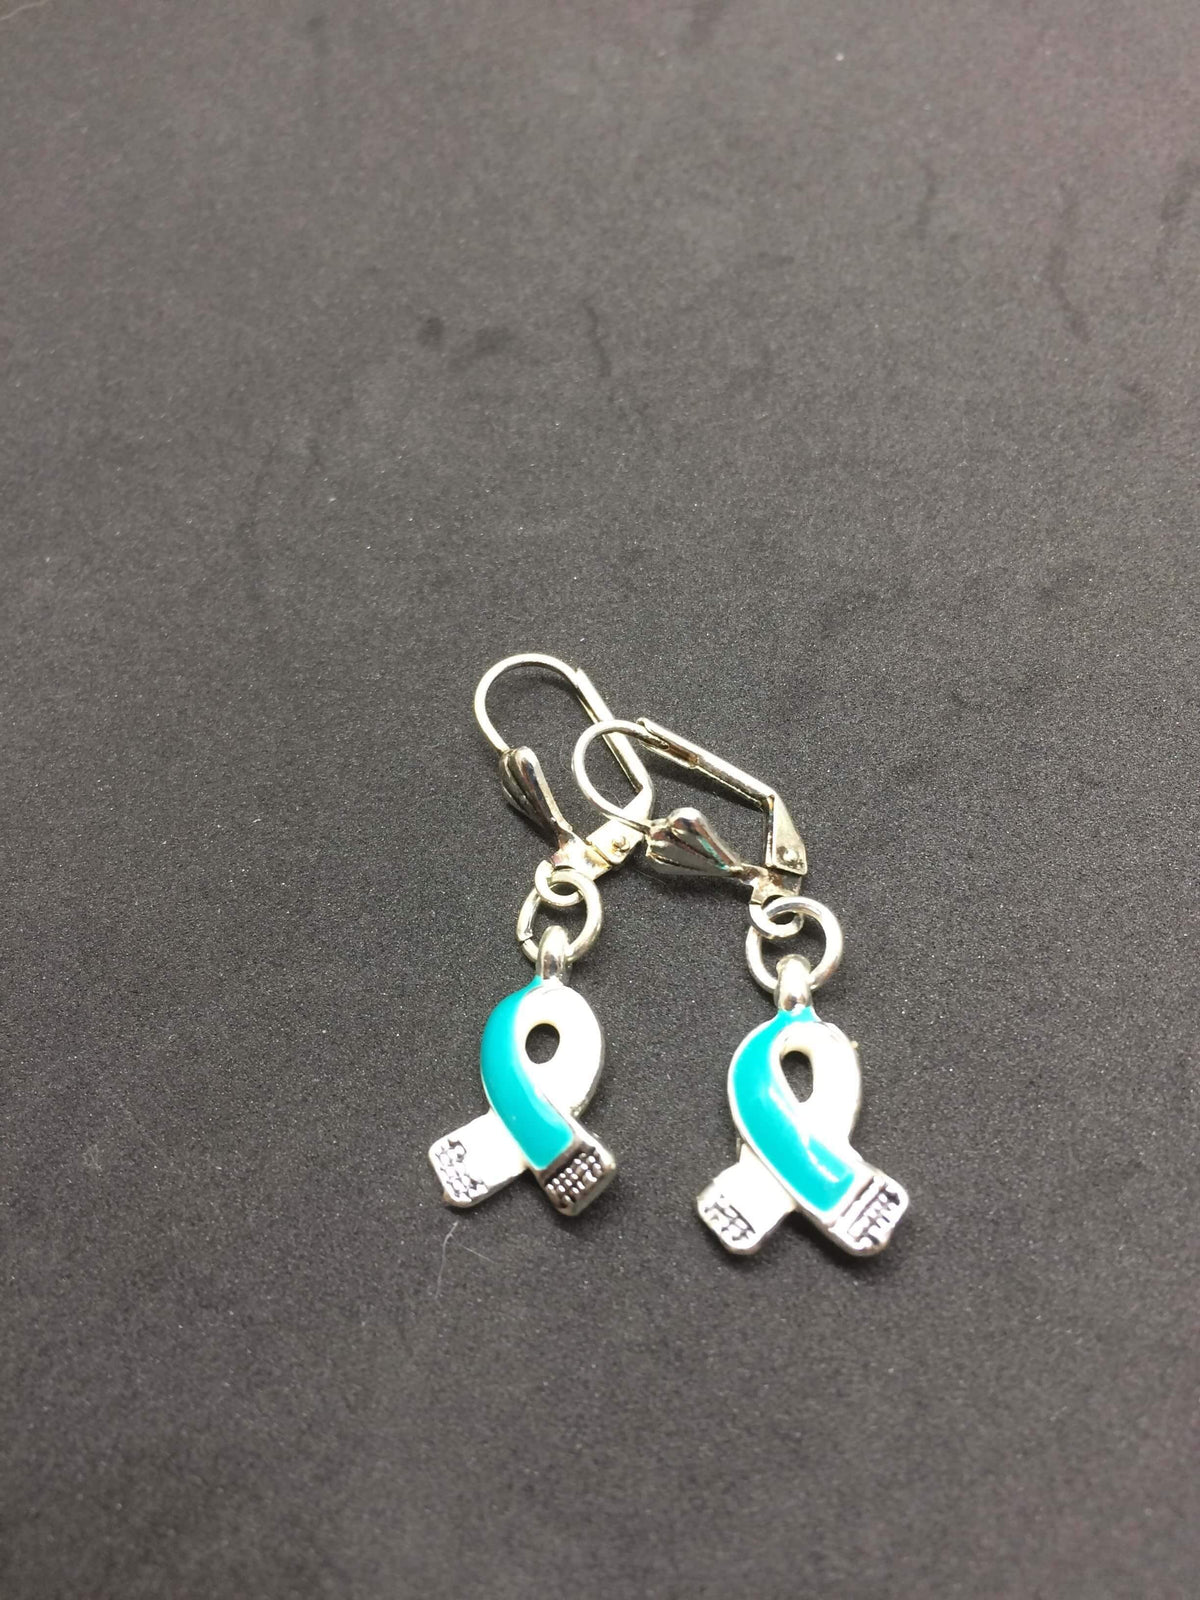 Teal Ribbon Charm Earrings for Cancer Awareness - The House of Awareness